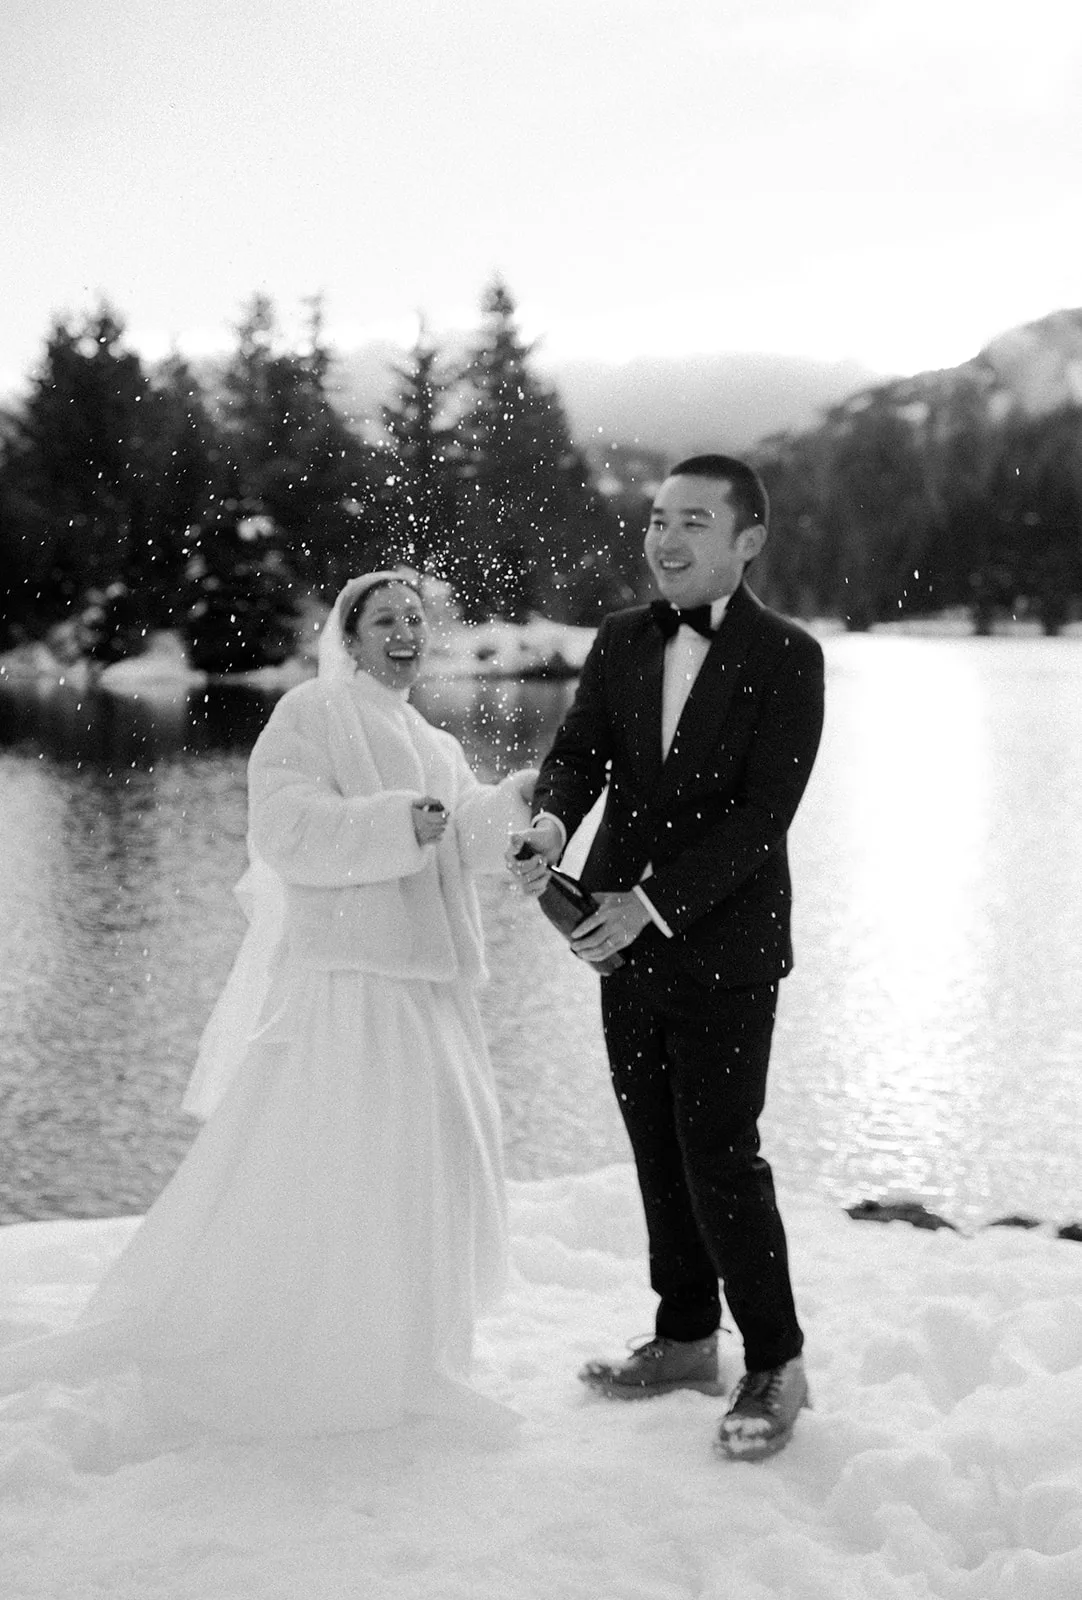 Bride and groom in a joyful champagne toast, creating a spray of sparkling droplets against the snowy landscape.